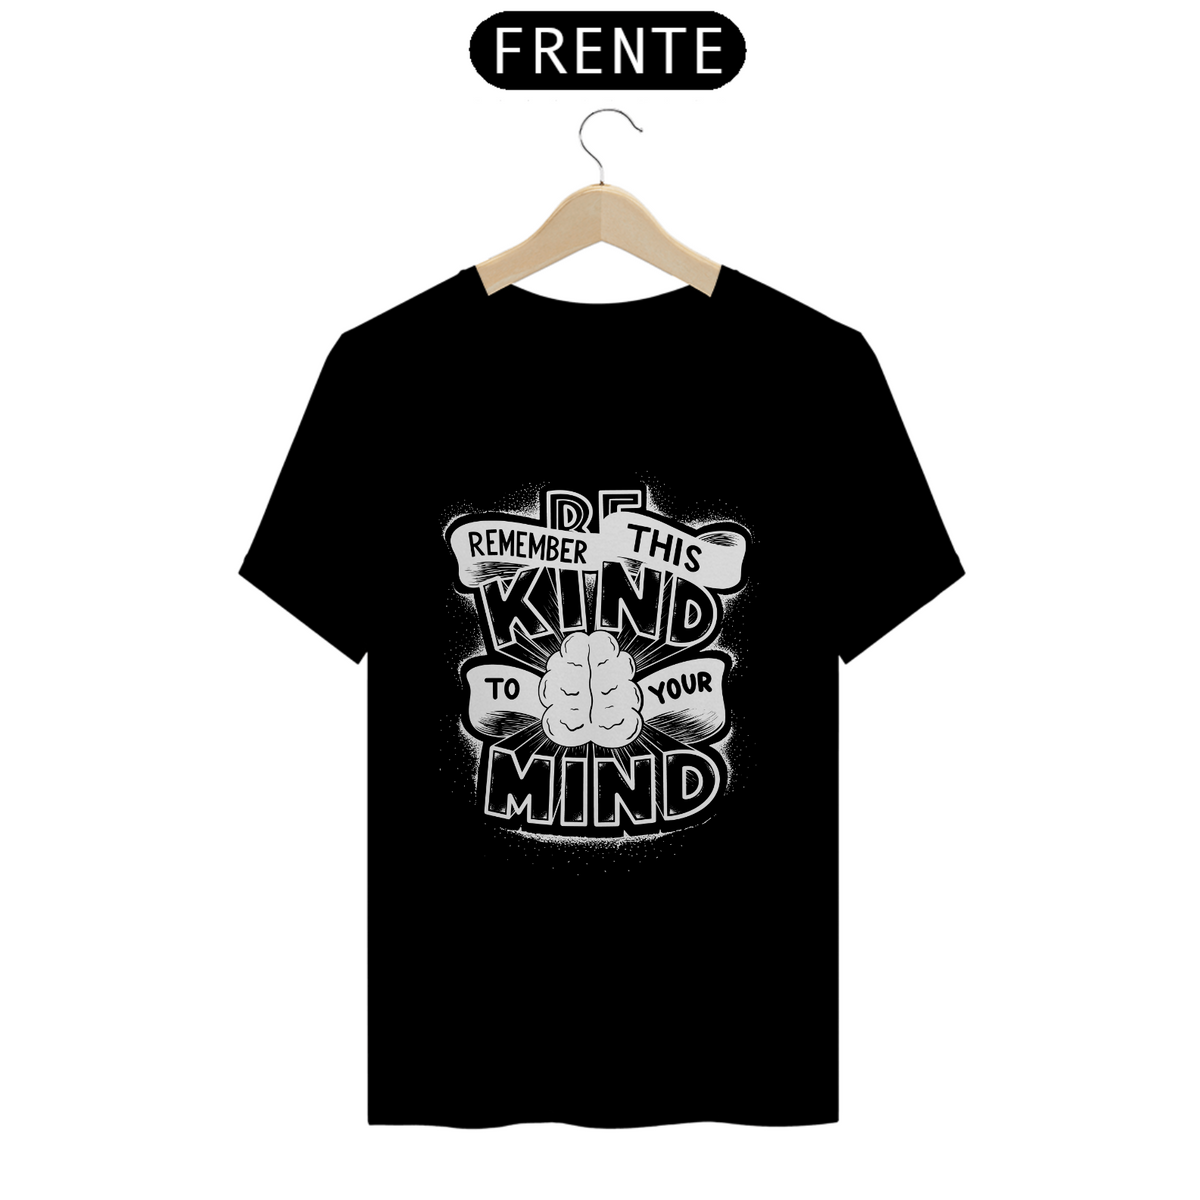 Nome do produto: Be Remember Classic T-shirt black - Quotes collection